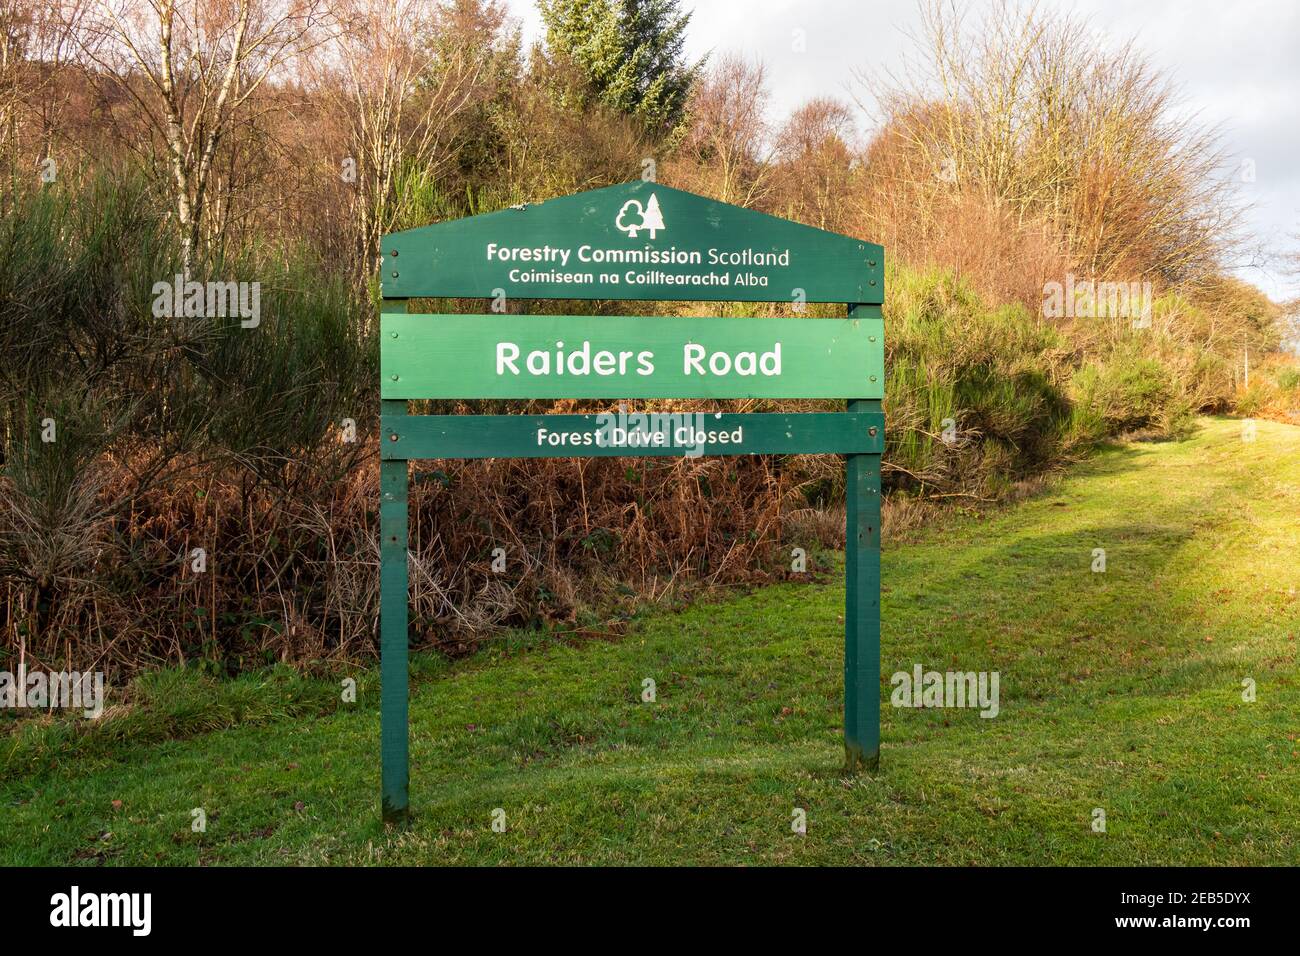 Mossdale, Scotland - December 21st 2020: Raiders Road forestry sign in the Galloway Forestry Park, Mossdale, Scotland Stock Photo